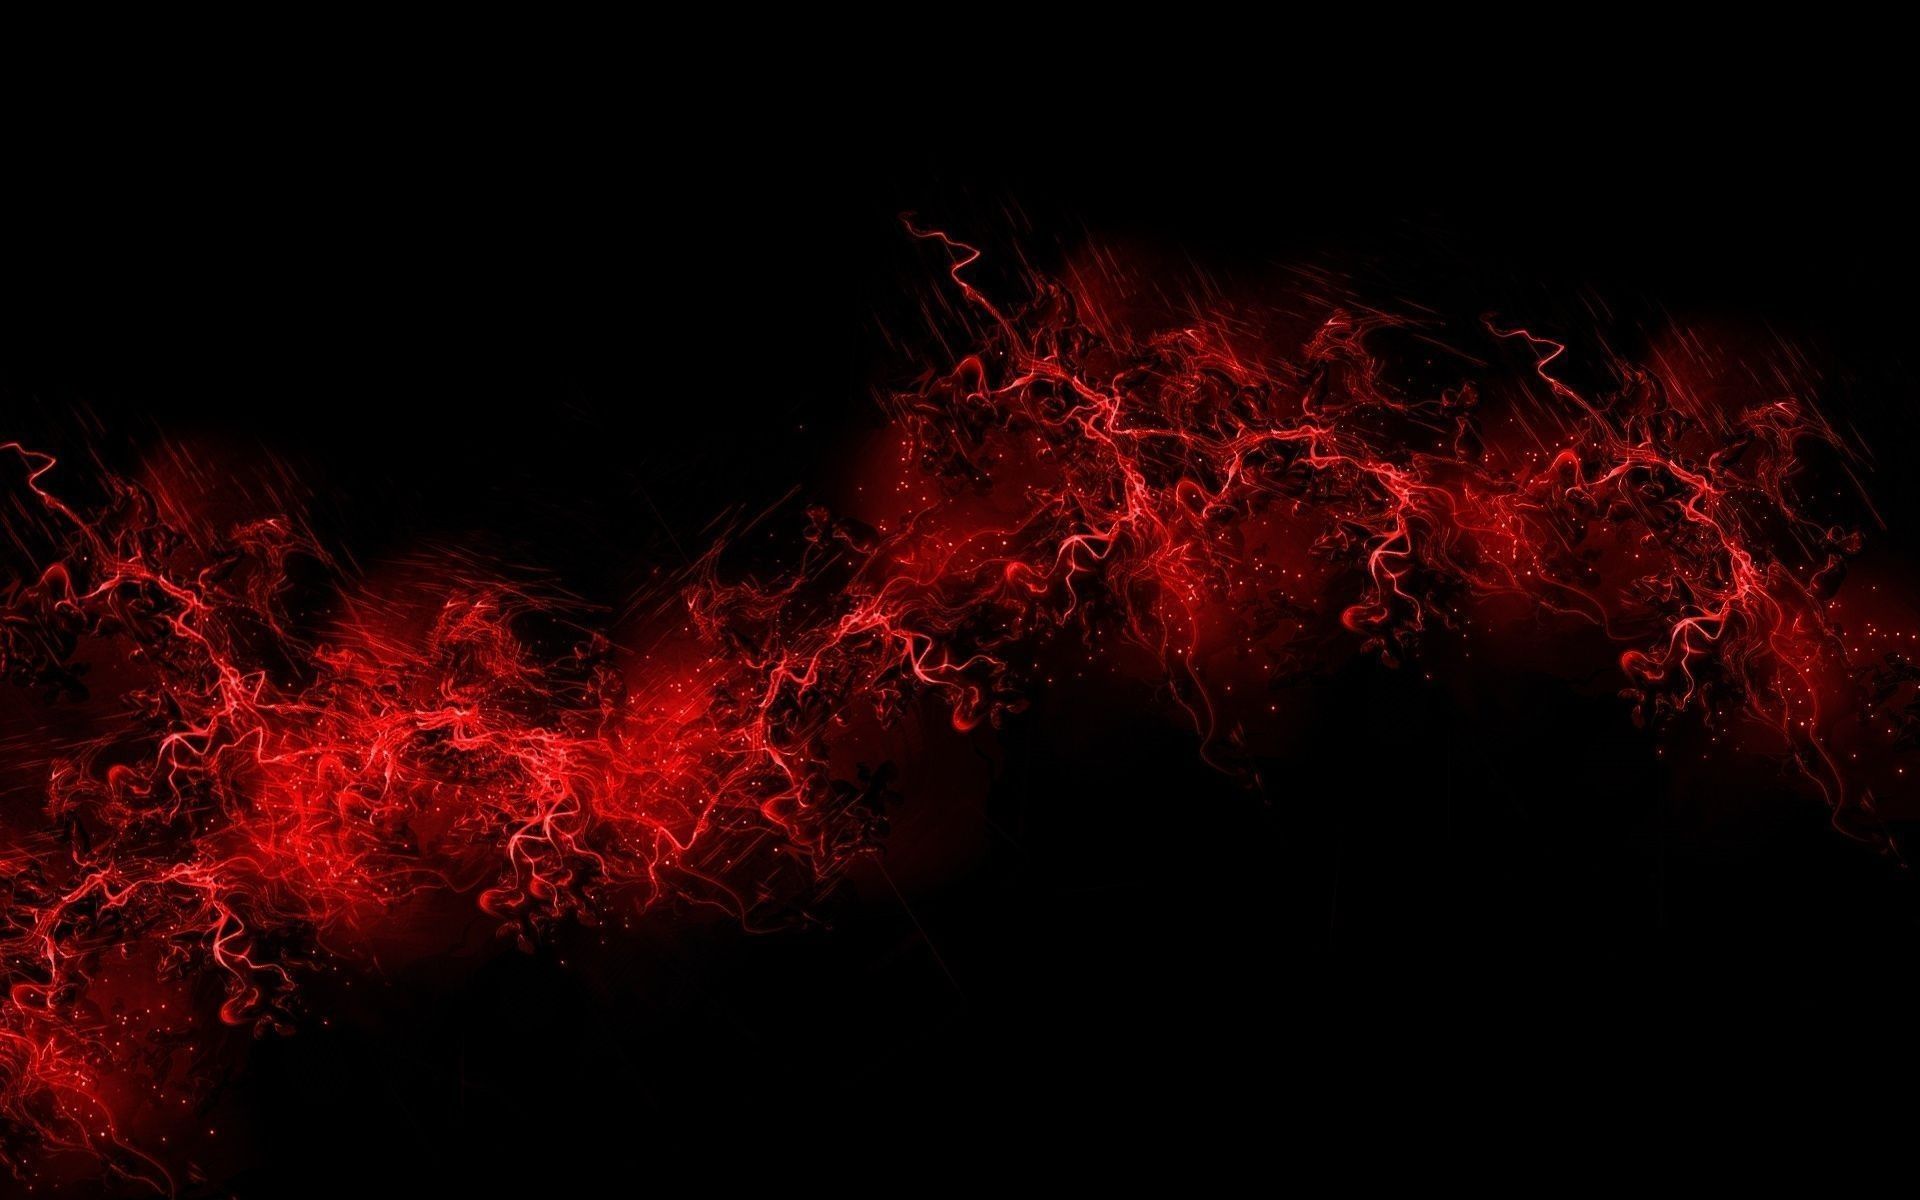 Red Lightning Backgrounds posted by Sarah Anderson